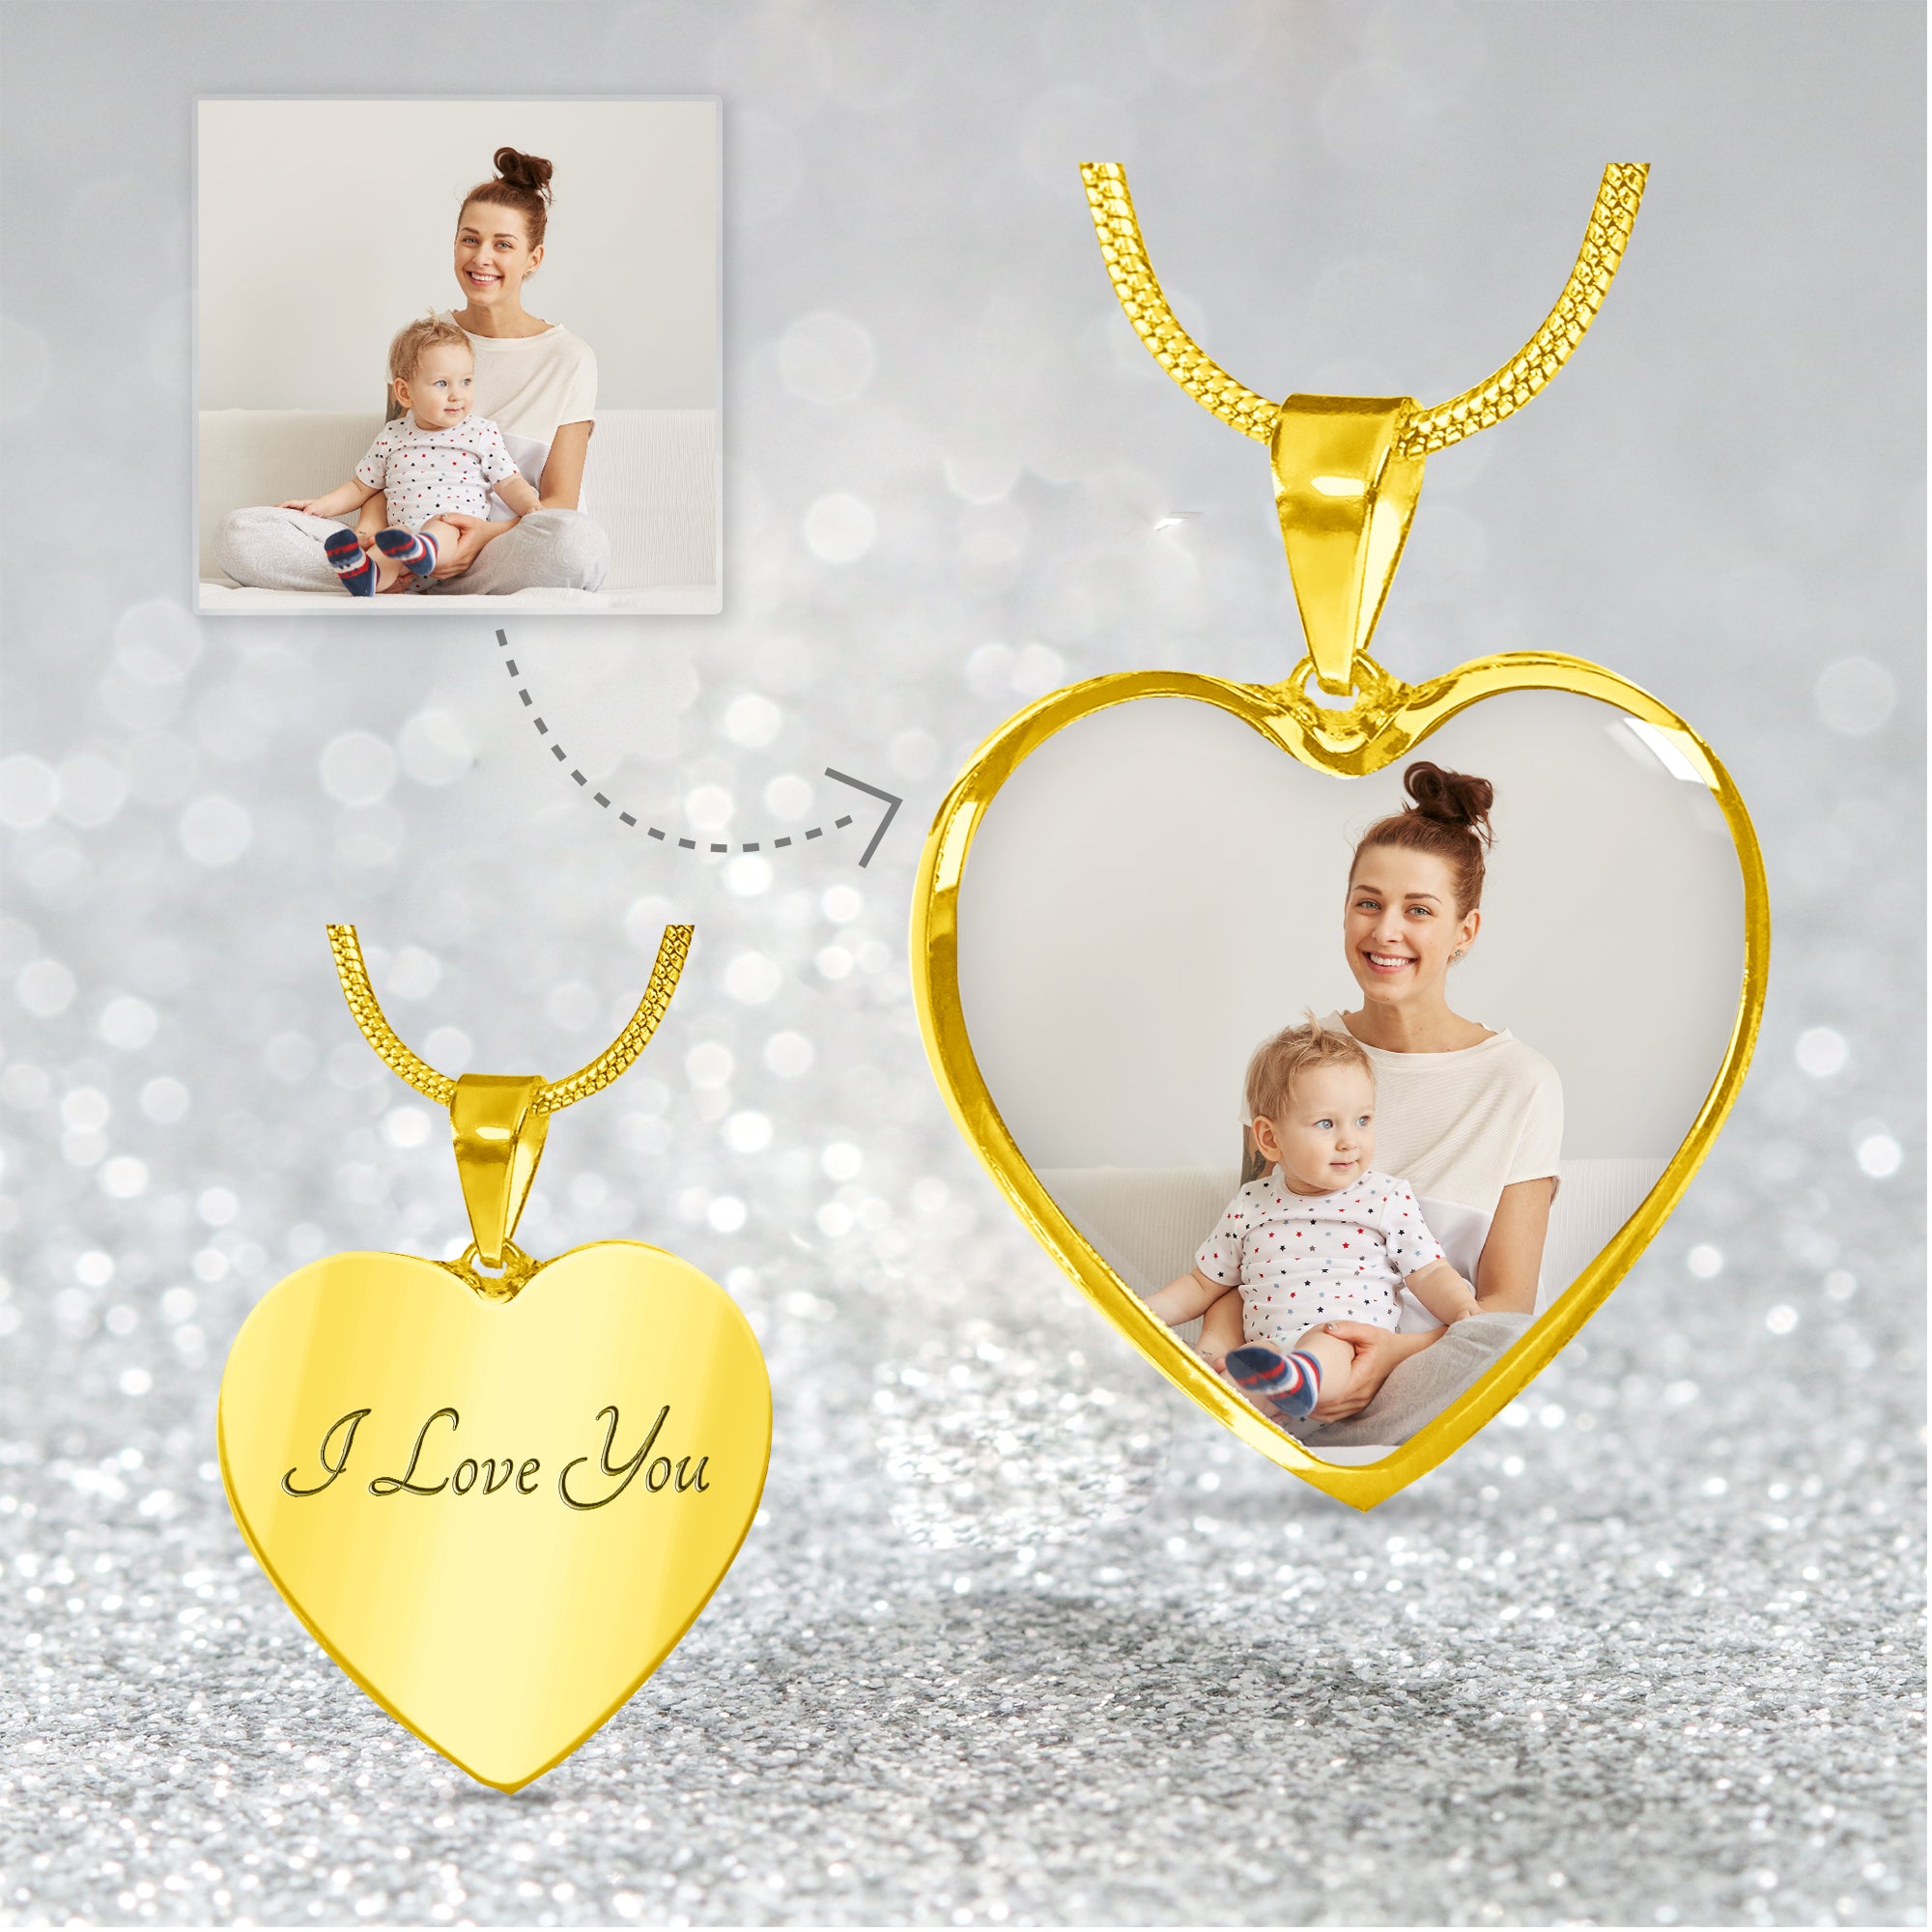 Personalized Photo Heart Necklace Gift